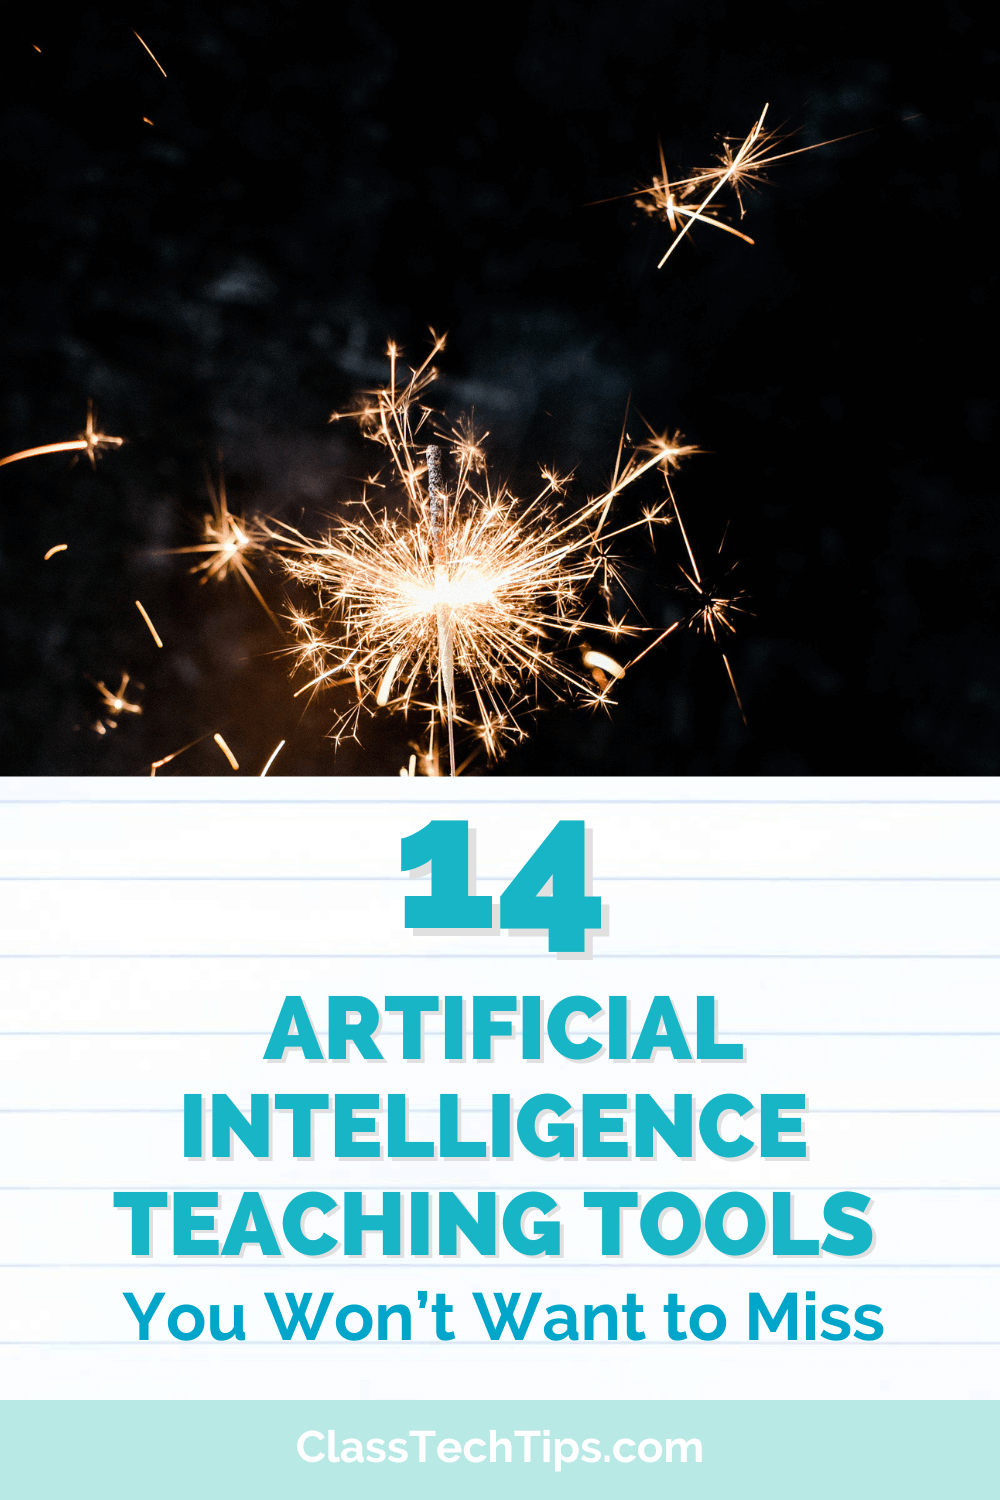 A gleaming sparkler embodying excitement, emphasizing the transformative potential of artificial intelligence tools for educators to enhance lesson planning and boost student engagement.